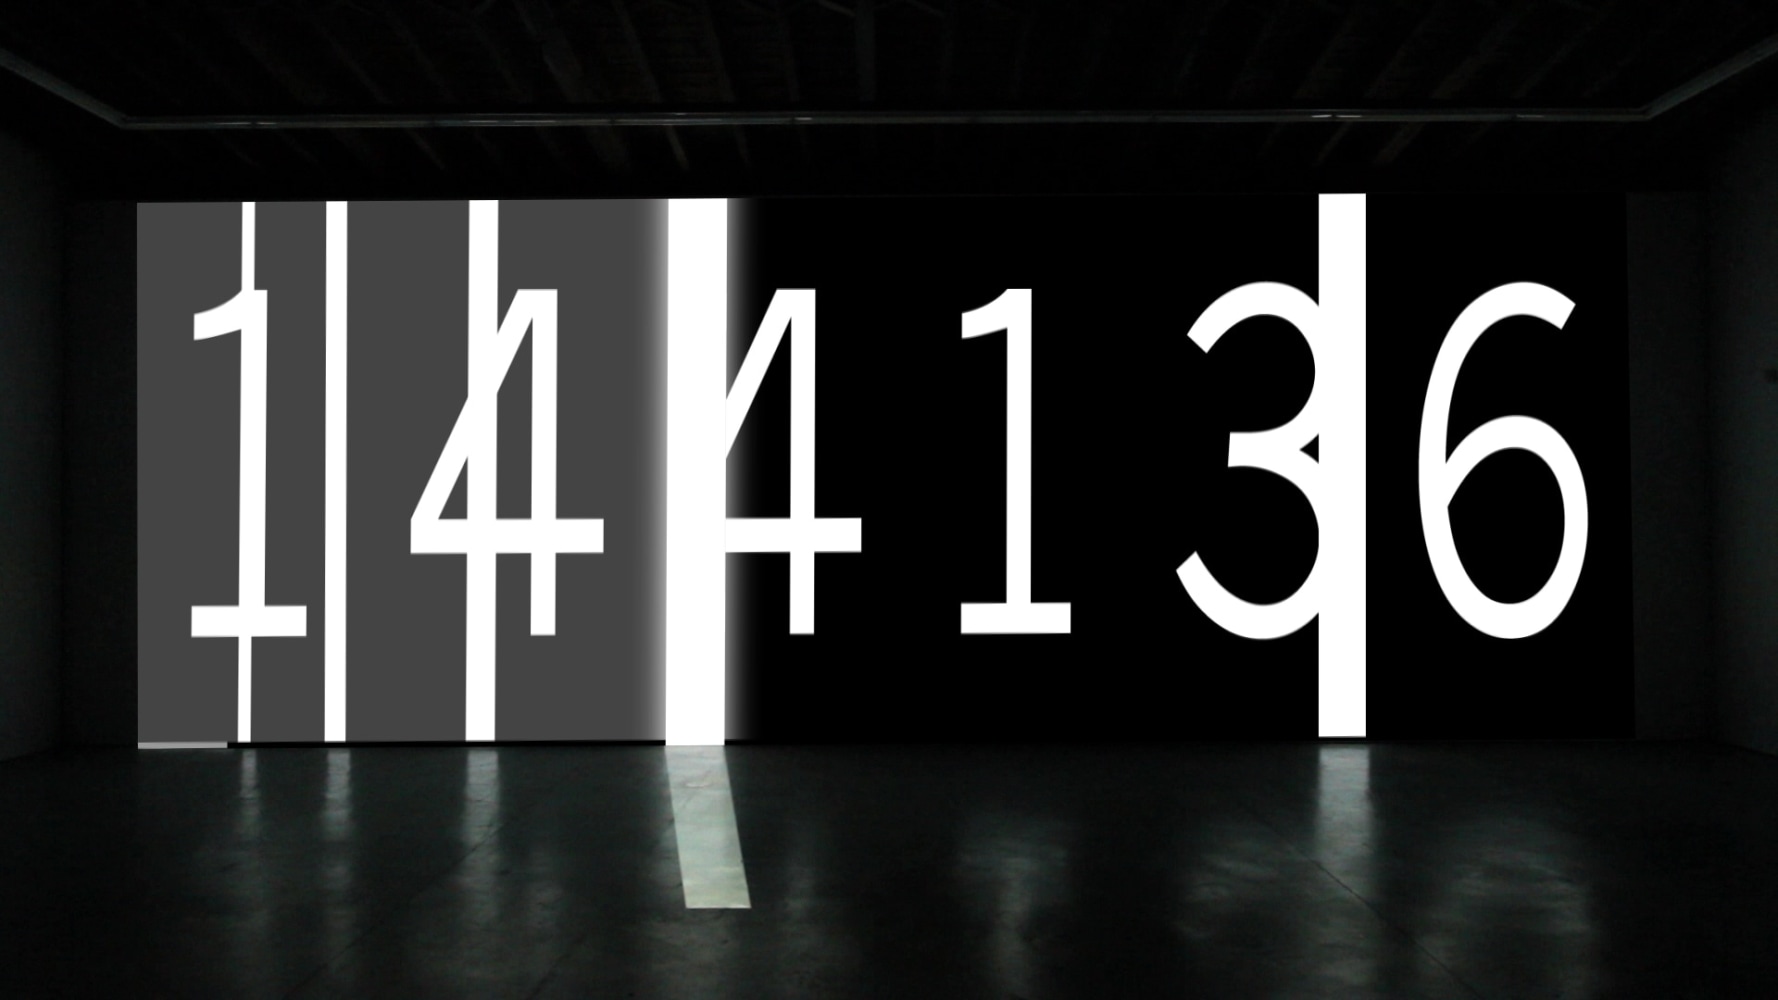 Charles Atlas
143652, 2012
Single channel video projection (silent)
Duration: 12 minutes
Edition of 5 plus 2 artist&amp;#39;s proofs